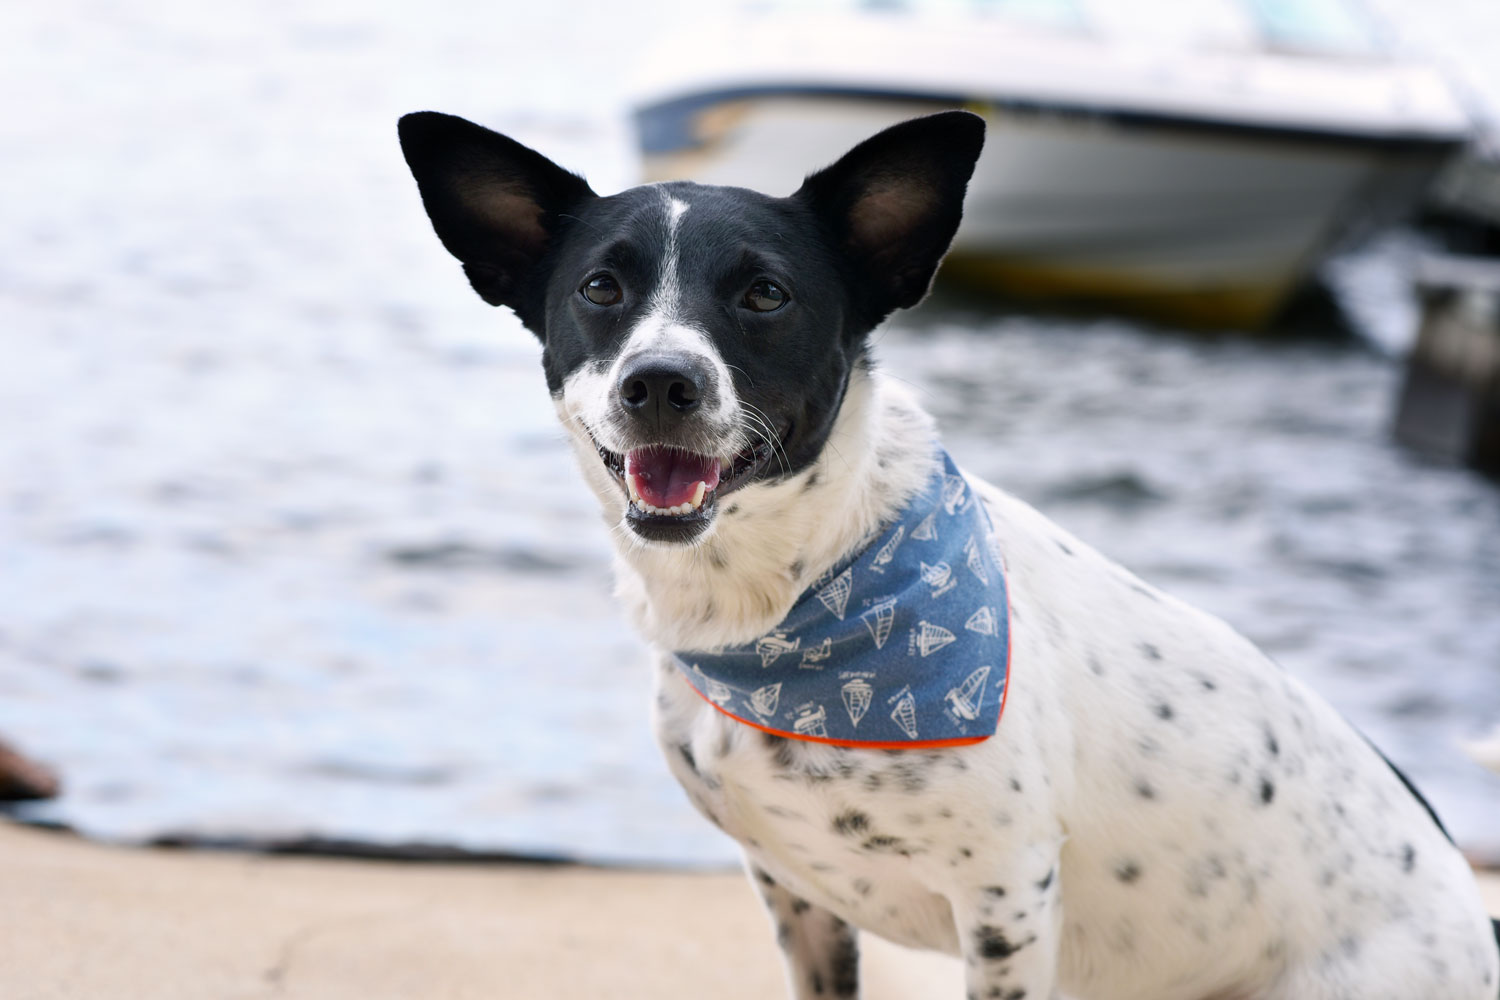 Does your dog like to swim? Will you be spending time by the water? Don't jump in until you've read our dog water safety tips!